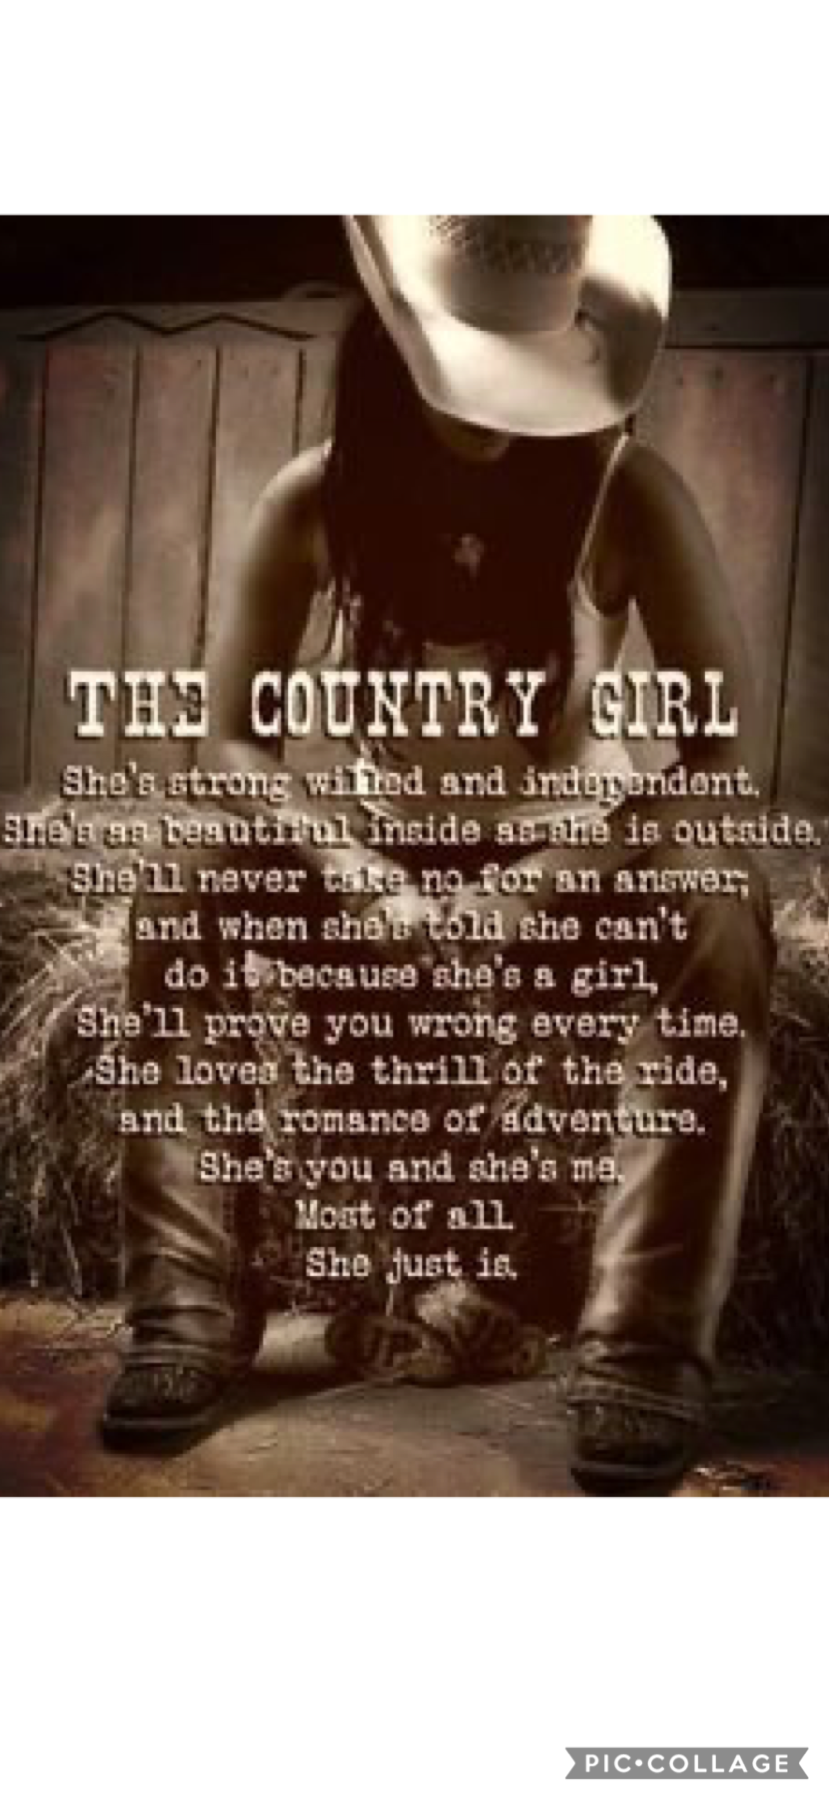 True about almost every country girl!!!